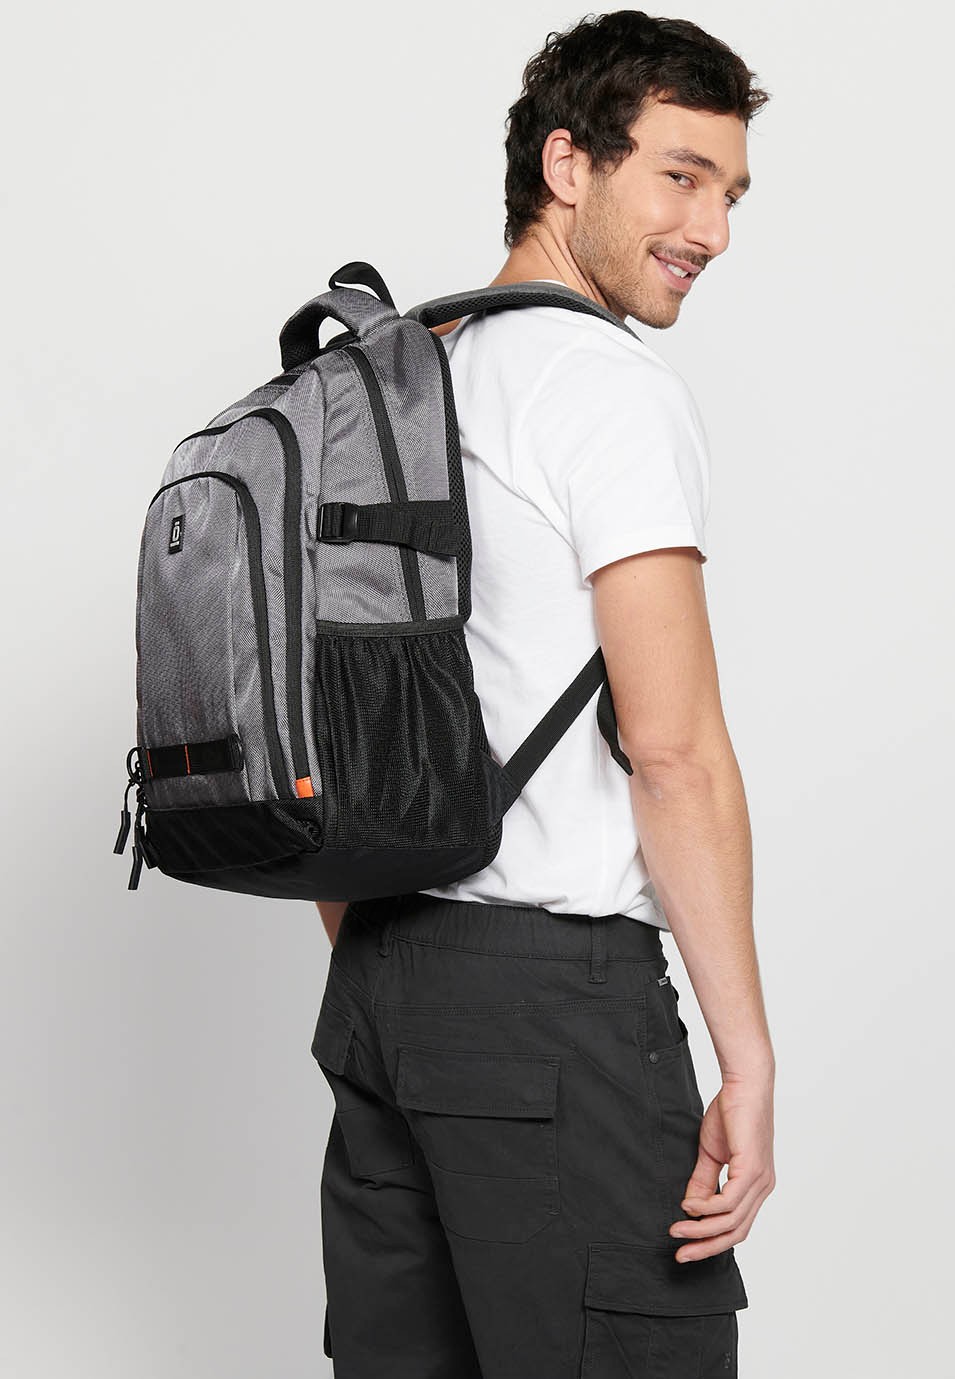 Koröshi backpack with three zippered compartments, one for laptop, with Gray interior pockets 6